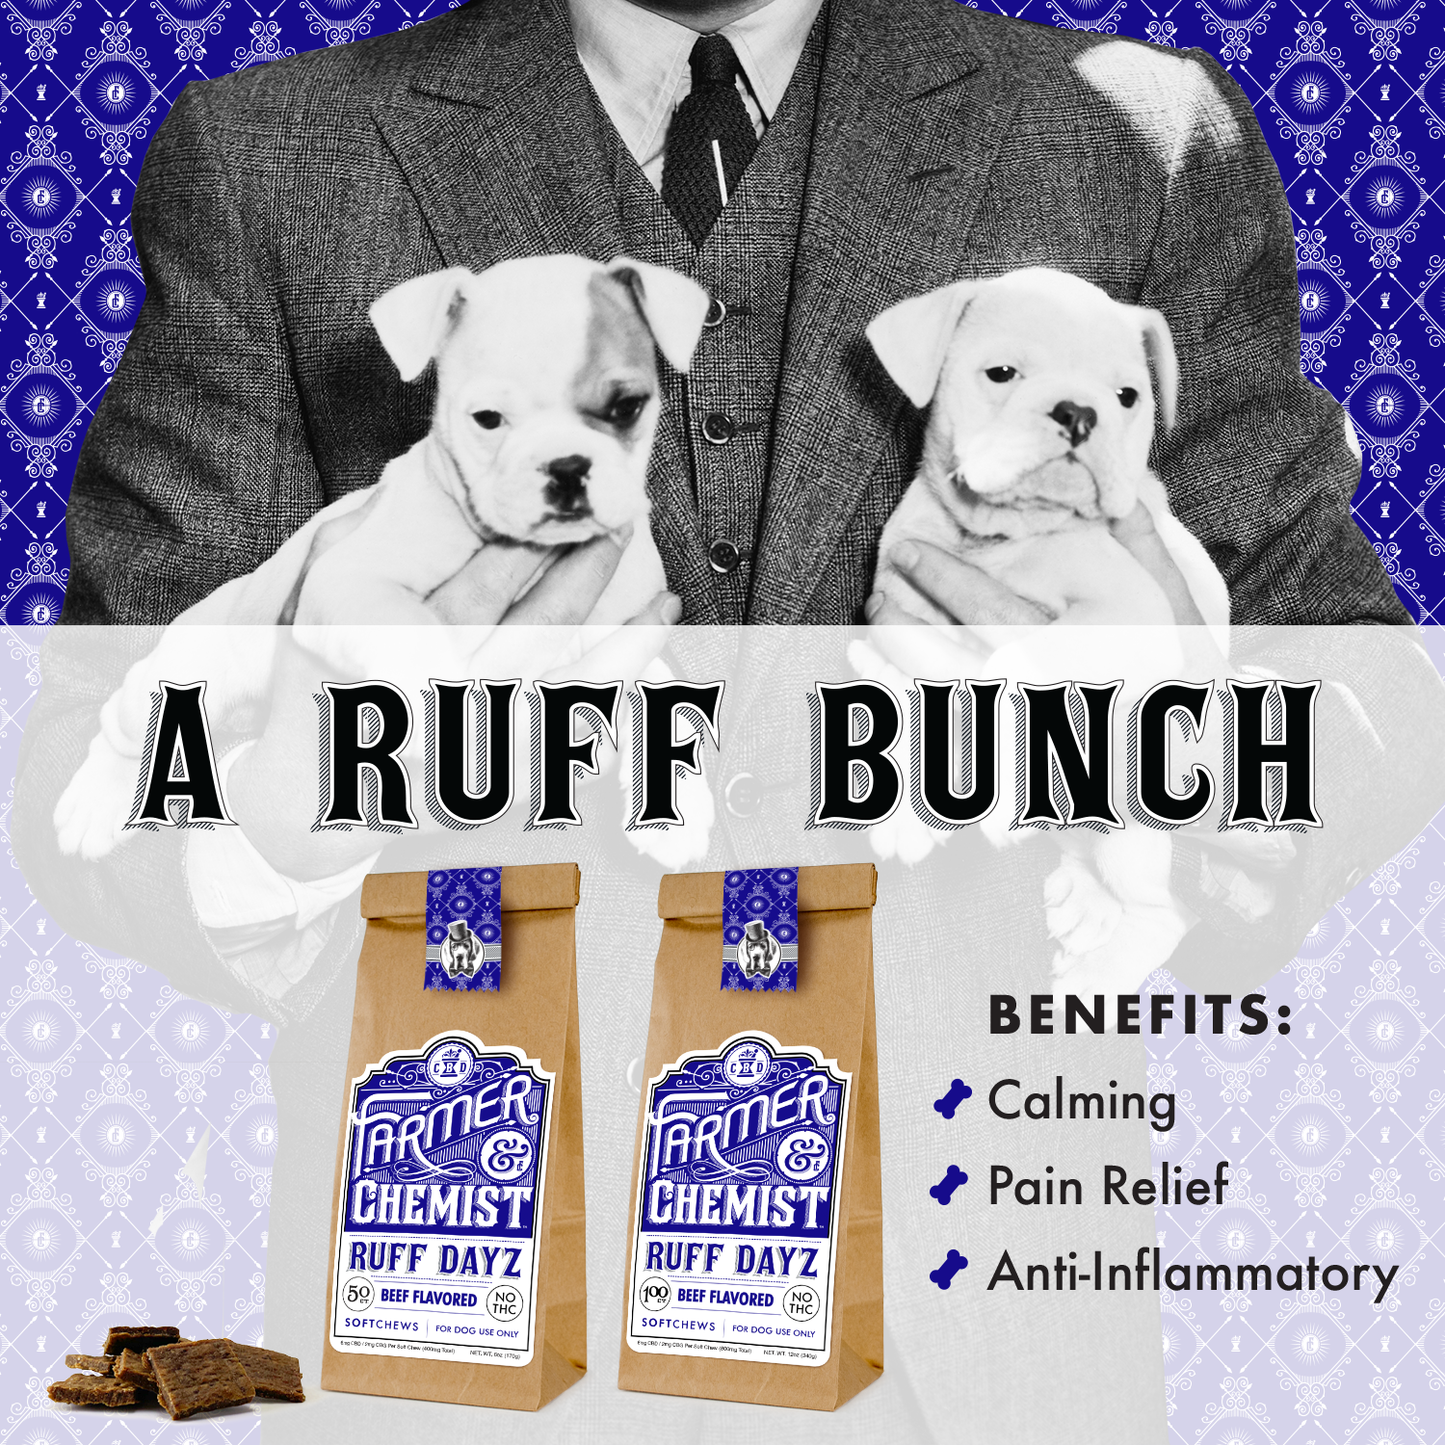 RUFF DAYZ - 100ct Beef Flavored Dog Soft Chews (Case pack of 4)